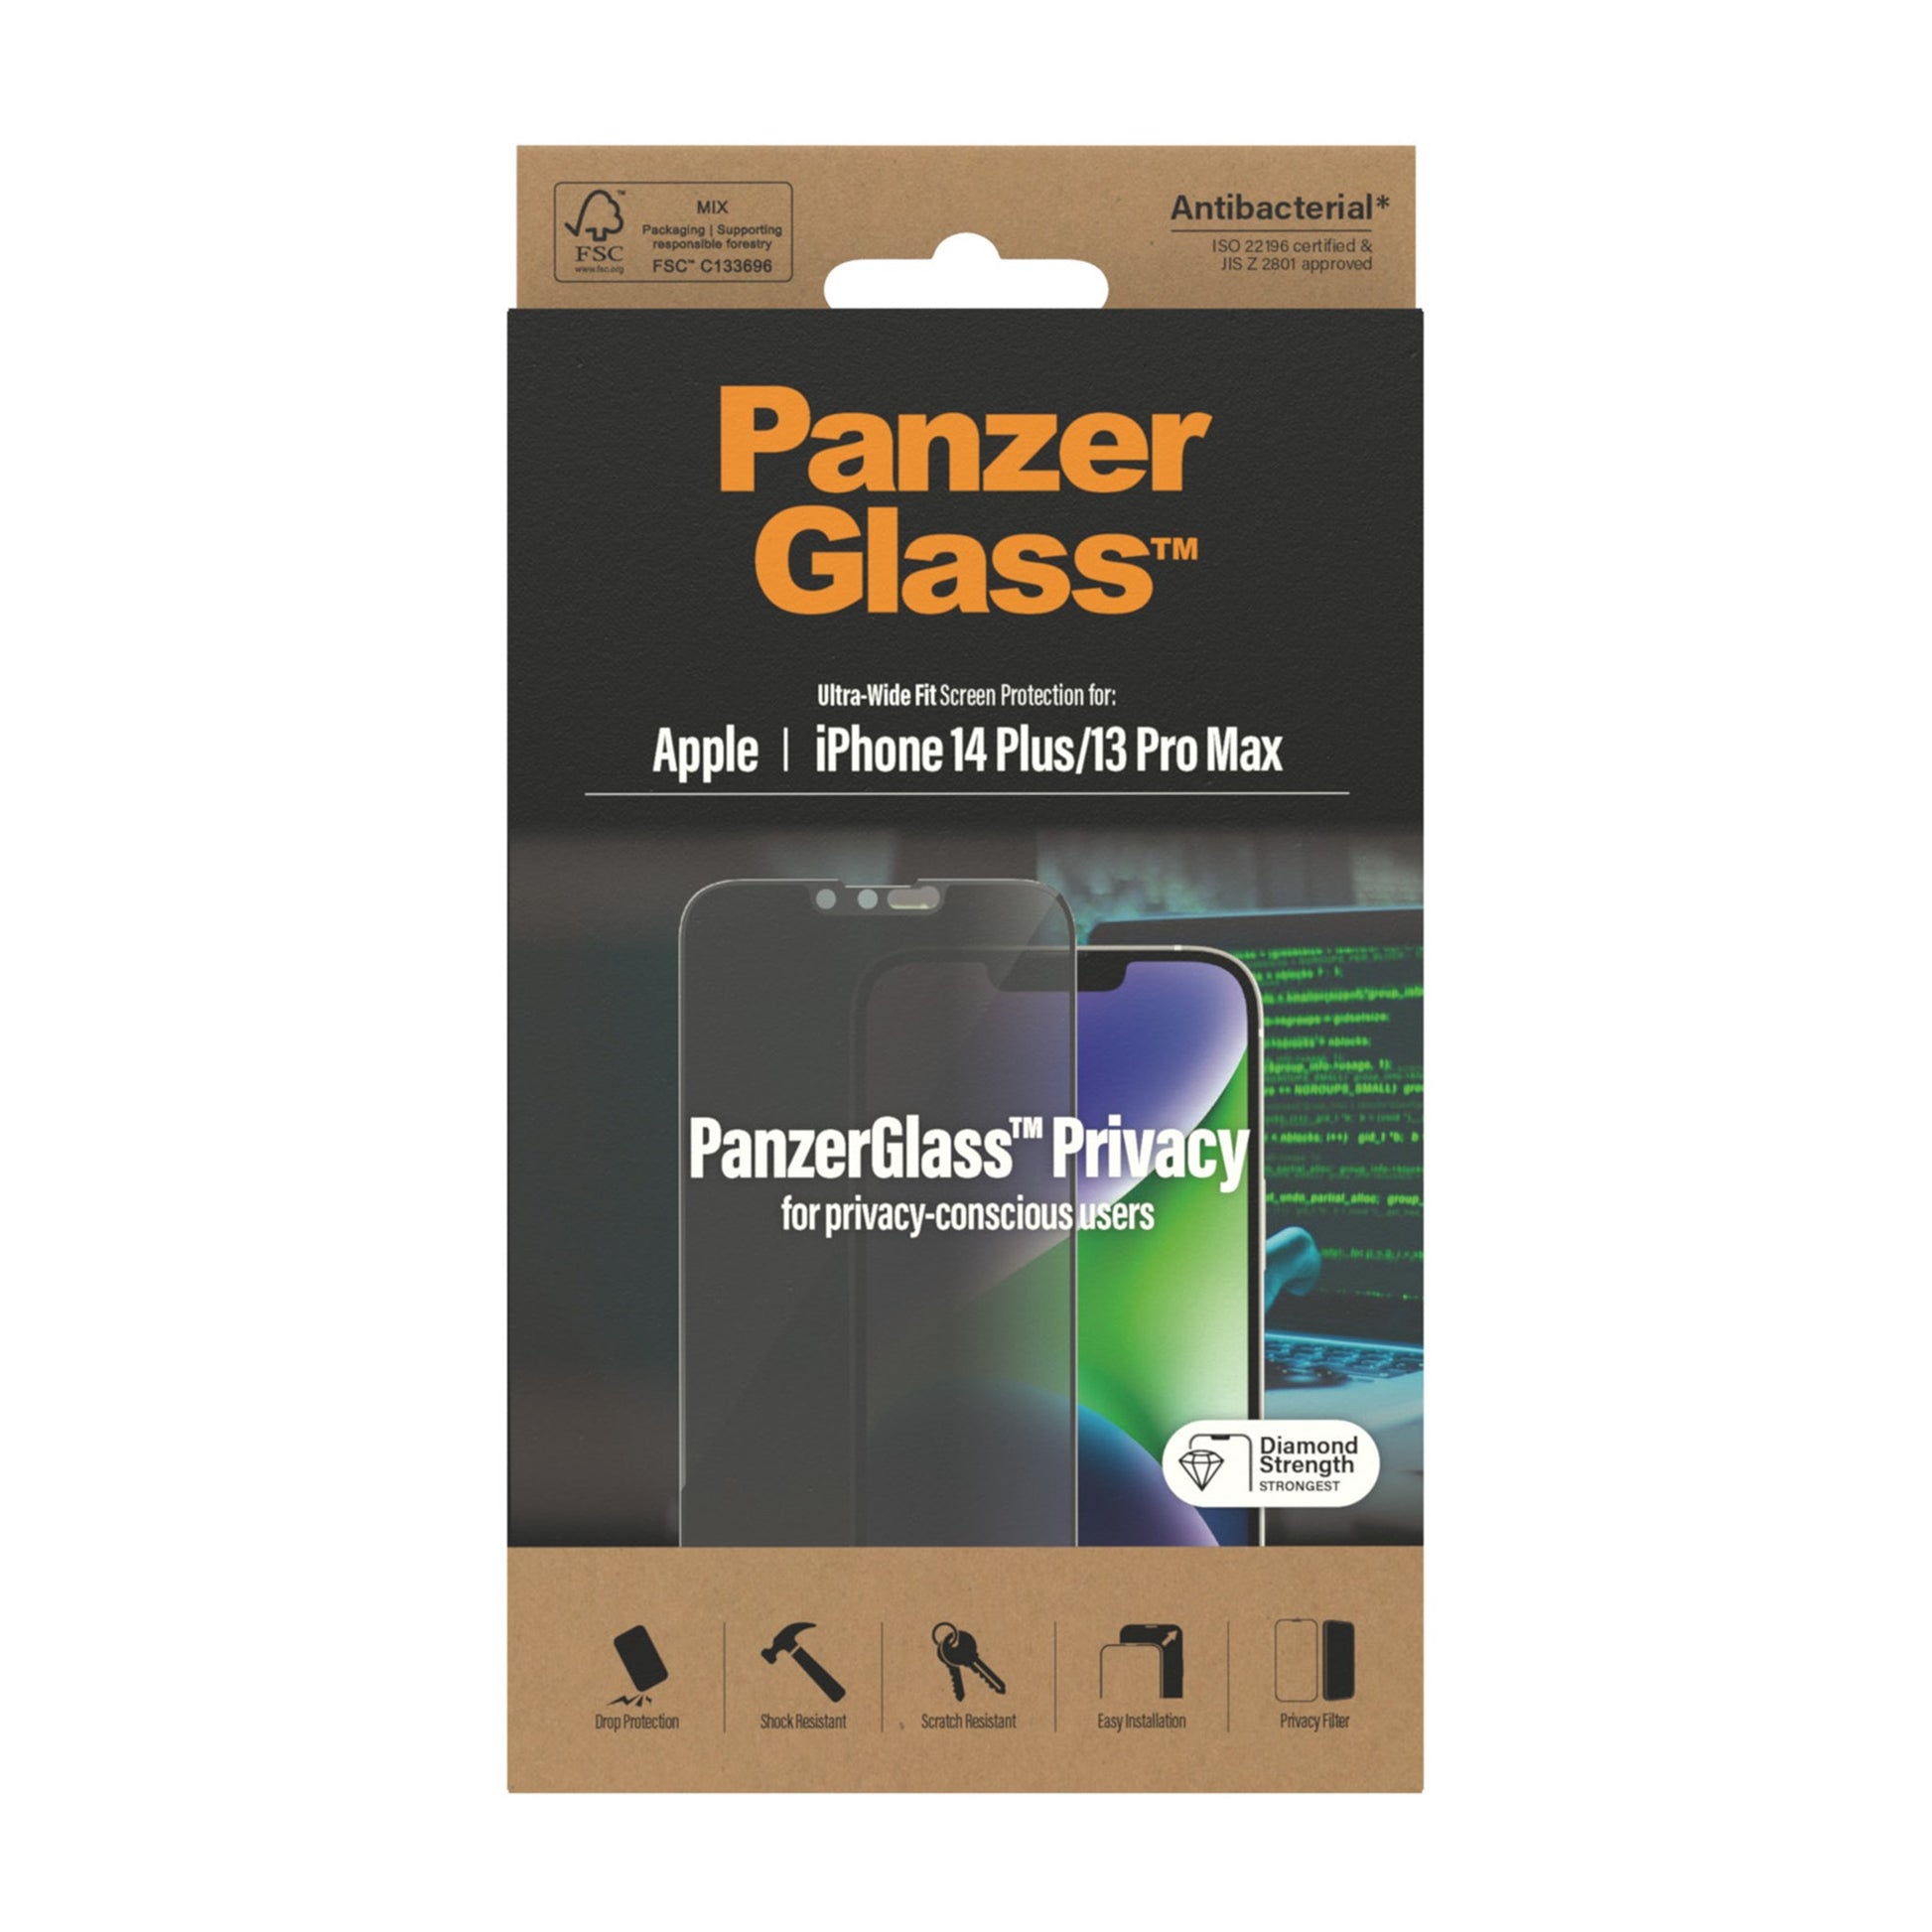 PanzerGlass™ Privacy Screen Protector Apple iPhone 14 Plus | 13 Pro Max | Ultra-Wide Fit 3